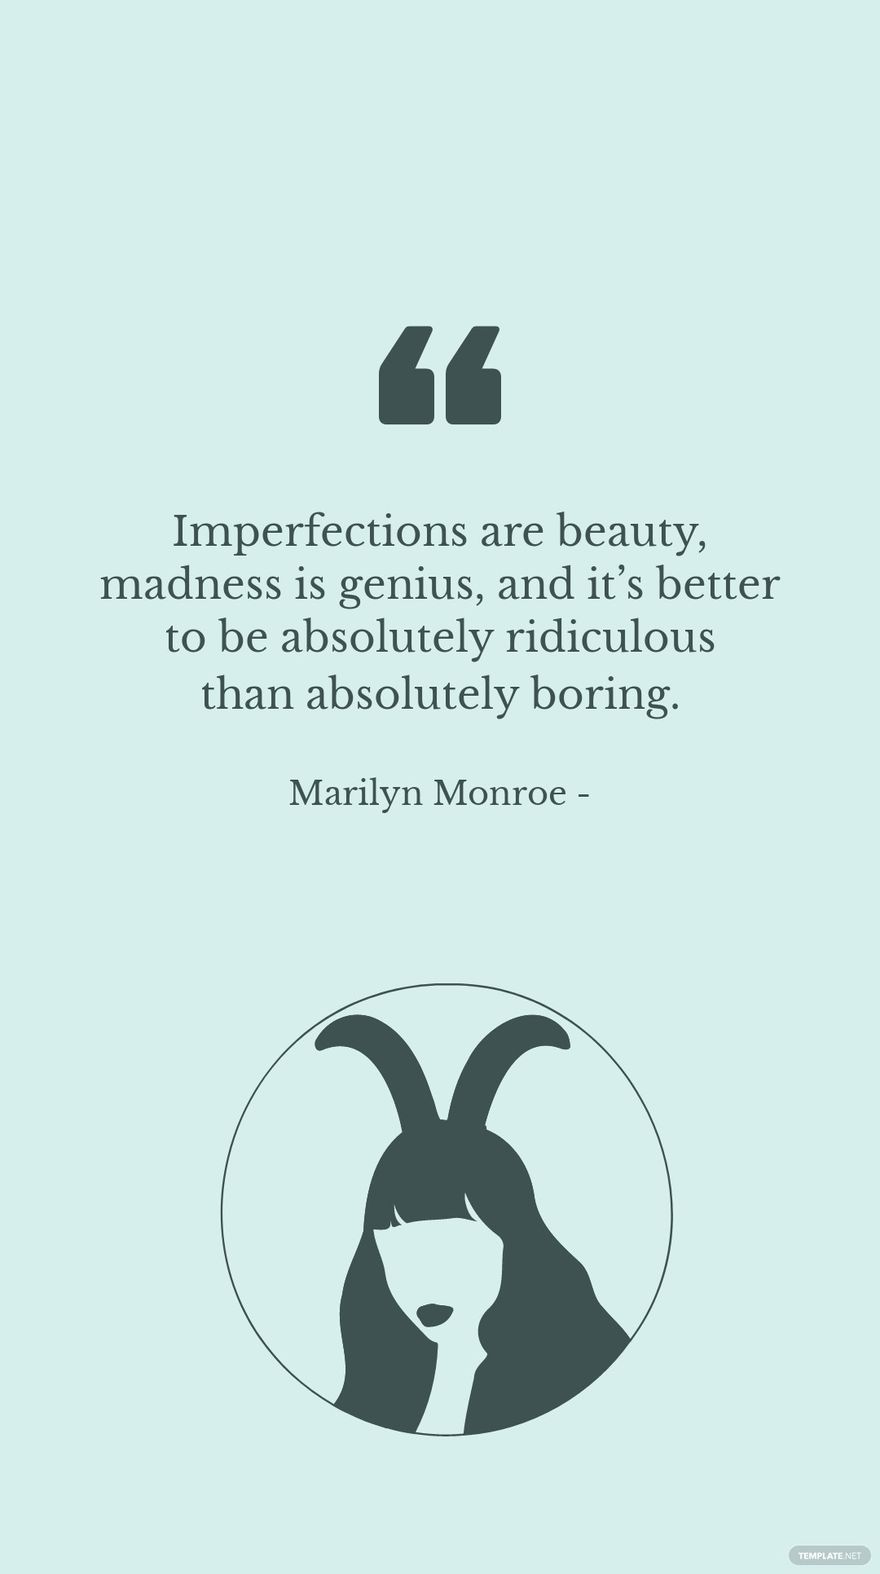 Marilyn Monroe - Imperfections are beauty, madness is genius, and it’s better to be absolutely ridiculous than absolutely boring.